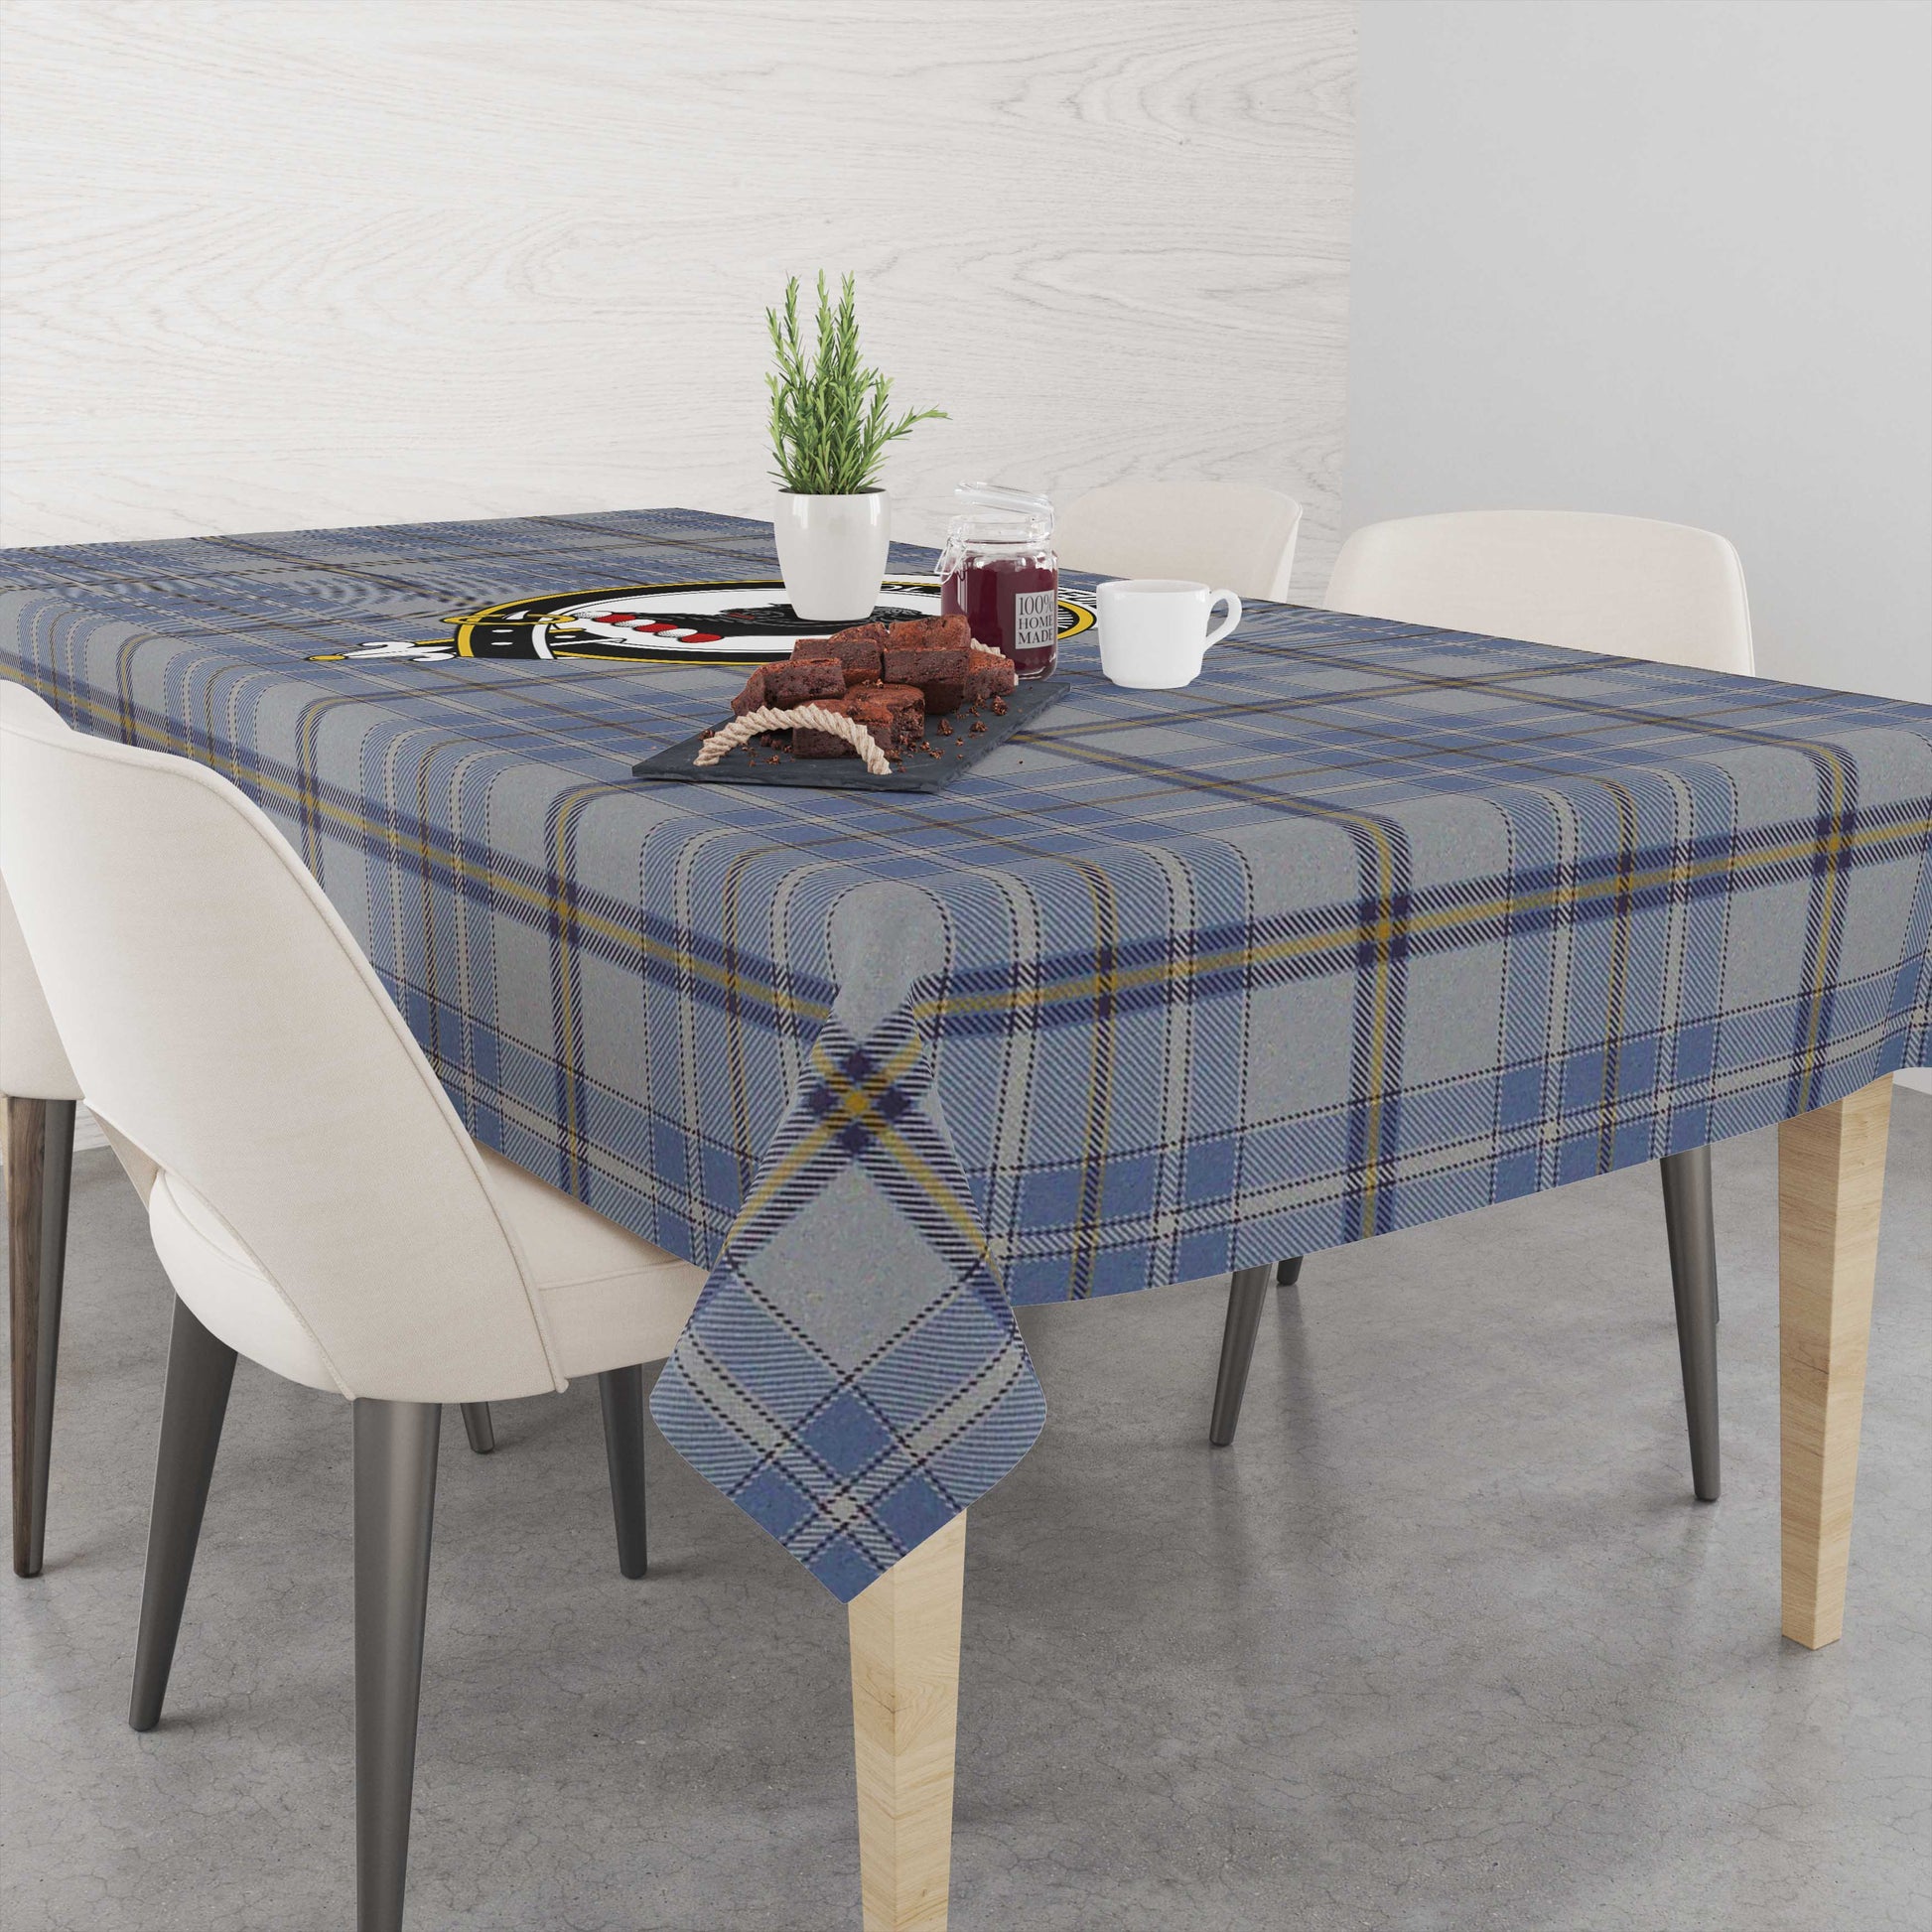 tweedie-tatan-tablecloth-with-family-crest